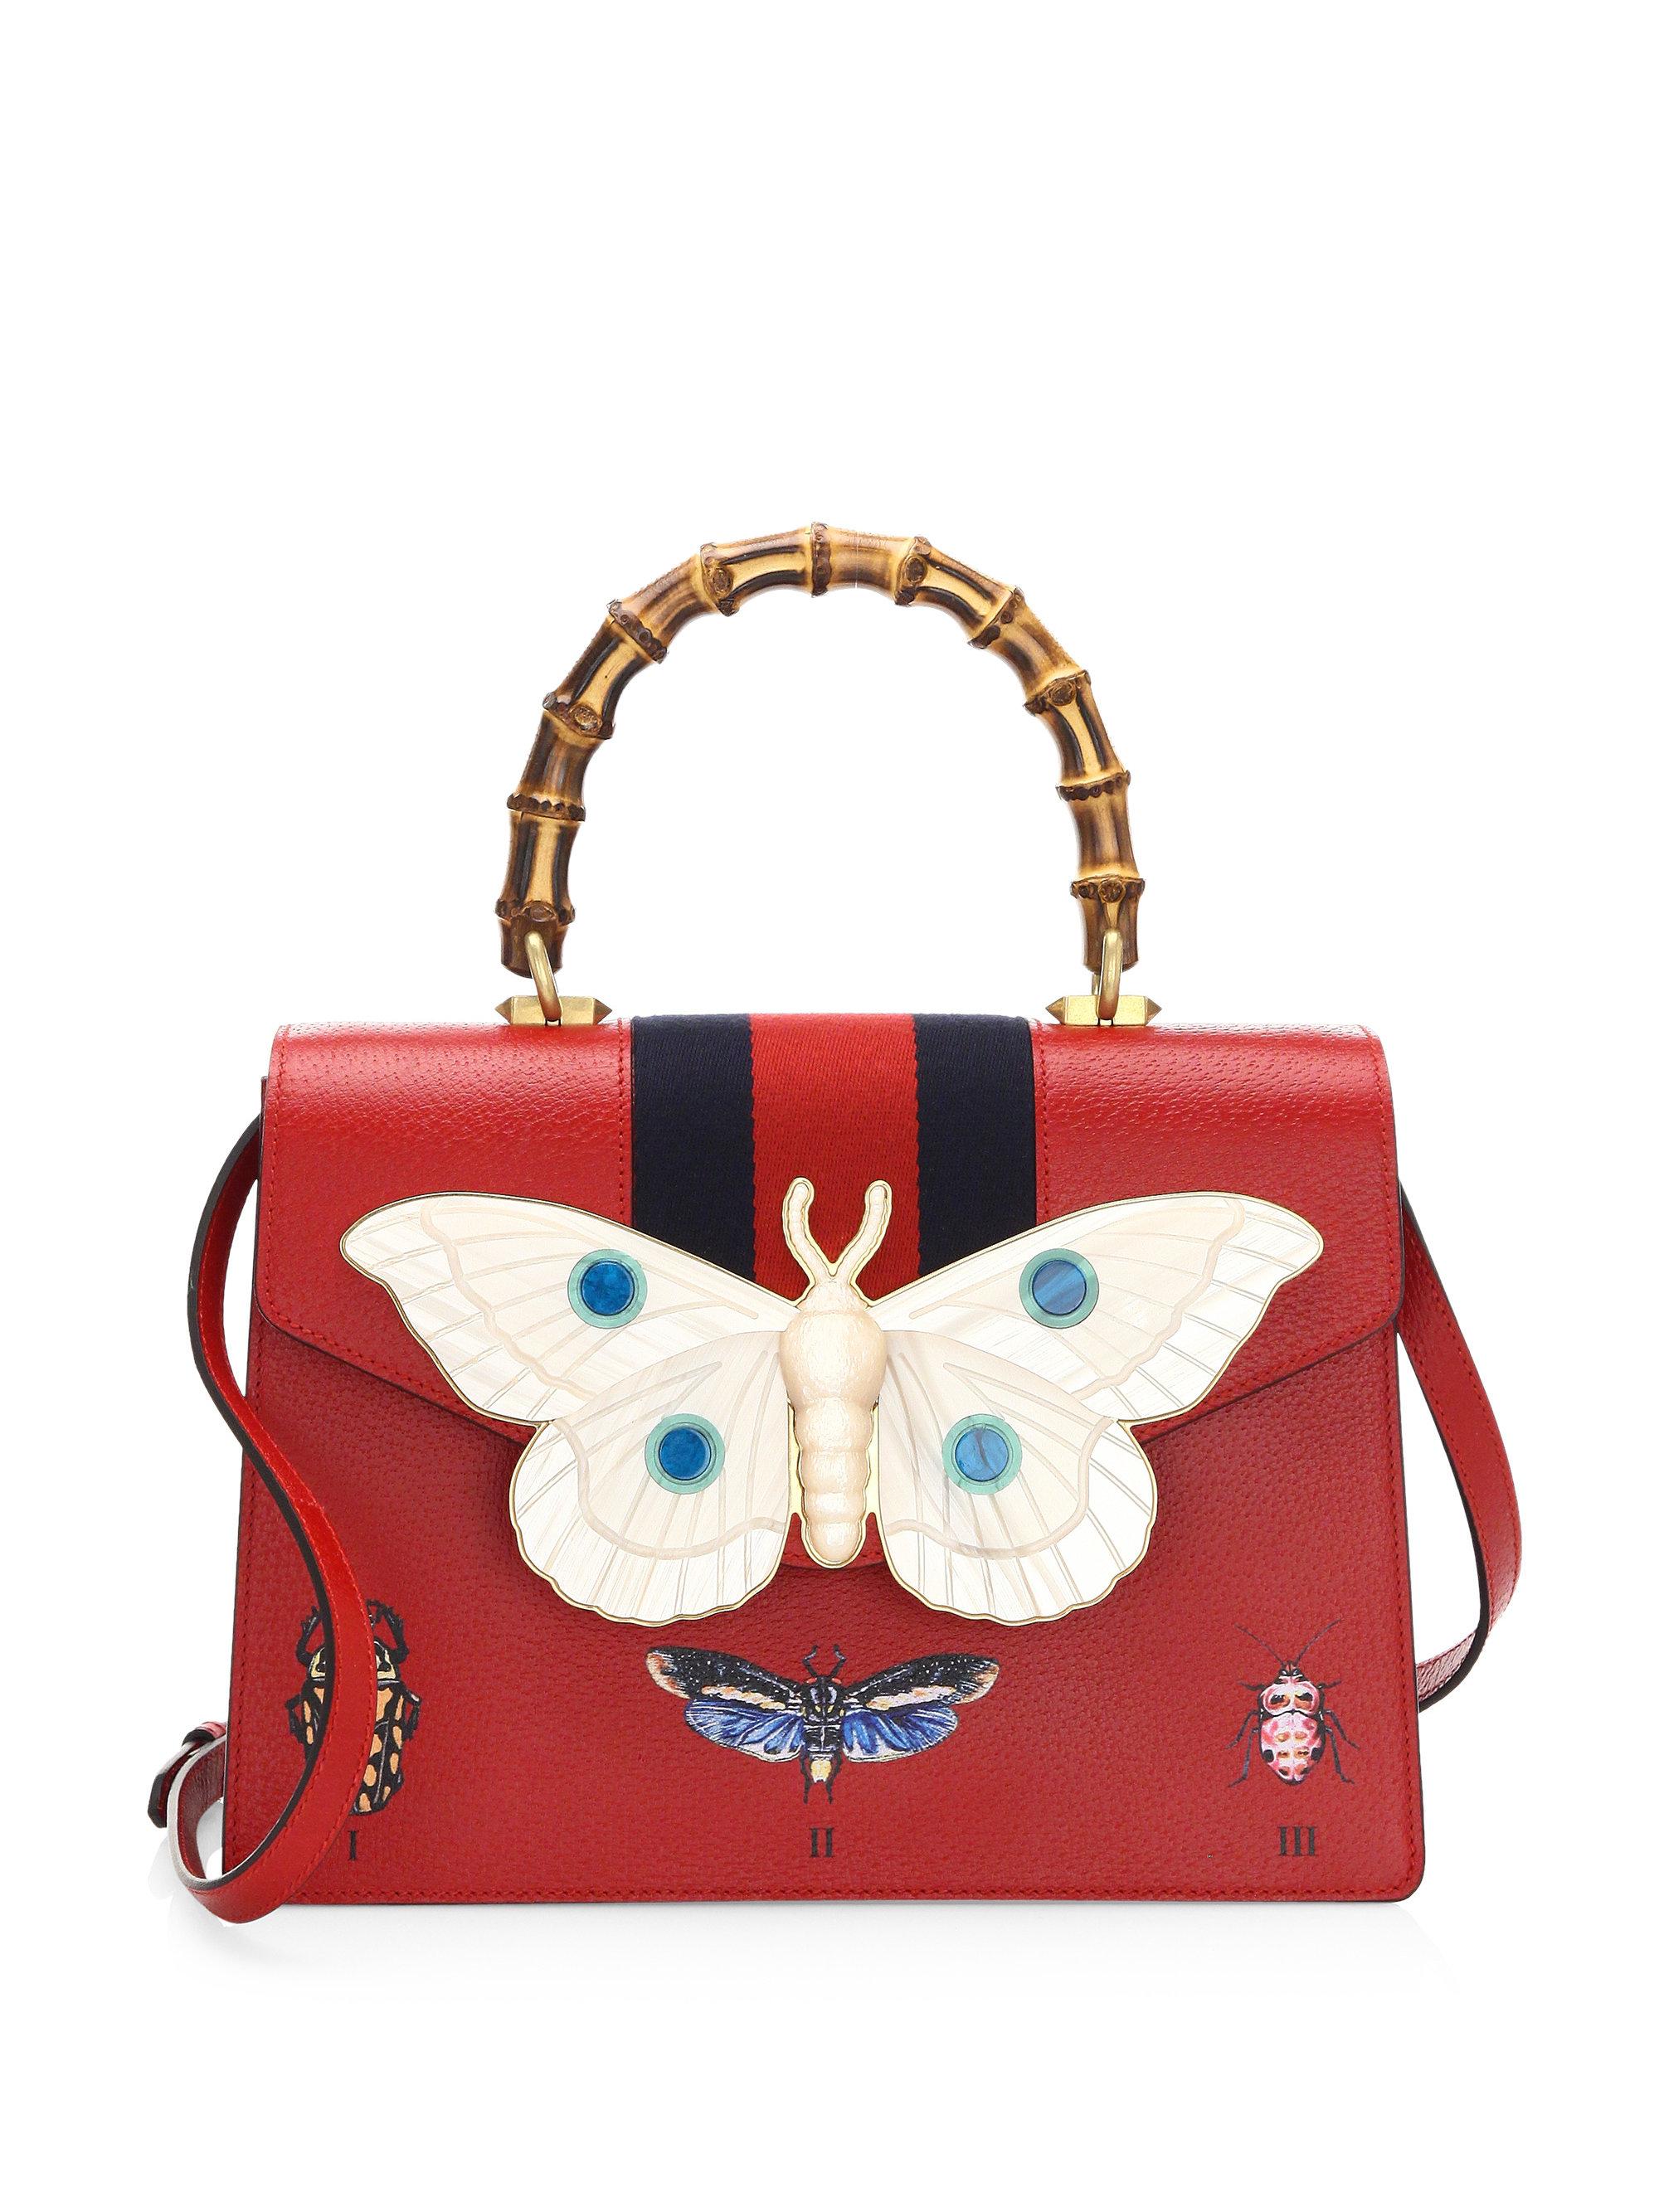 Gucci Butterfly Leather Handbag in Red | Lyst